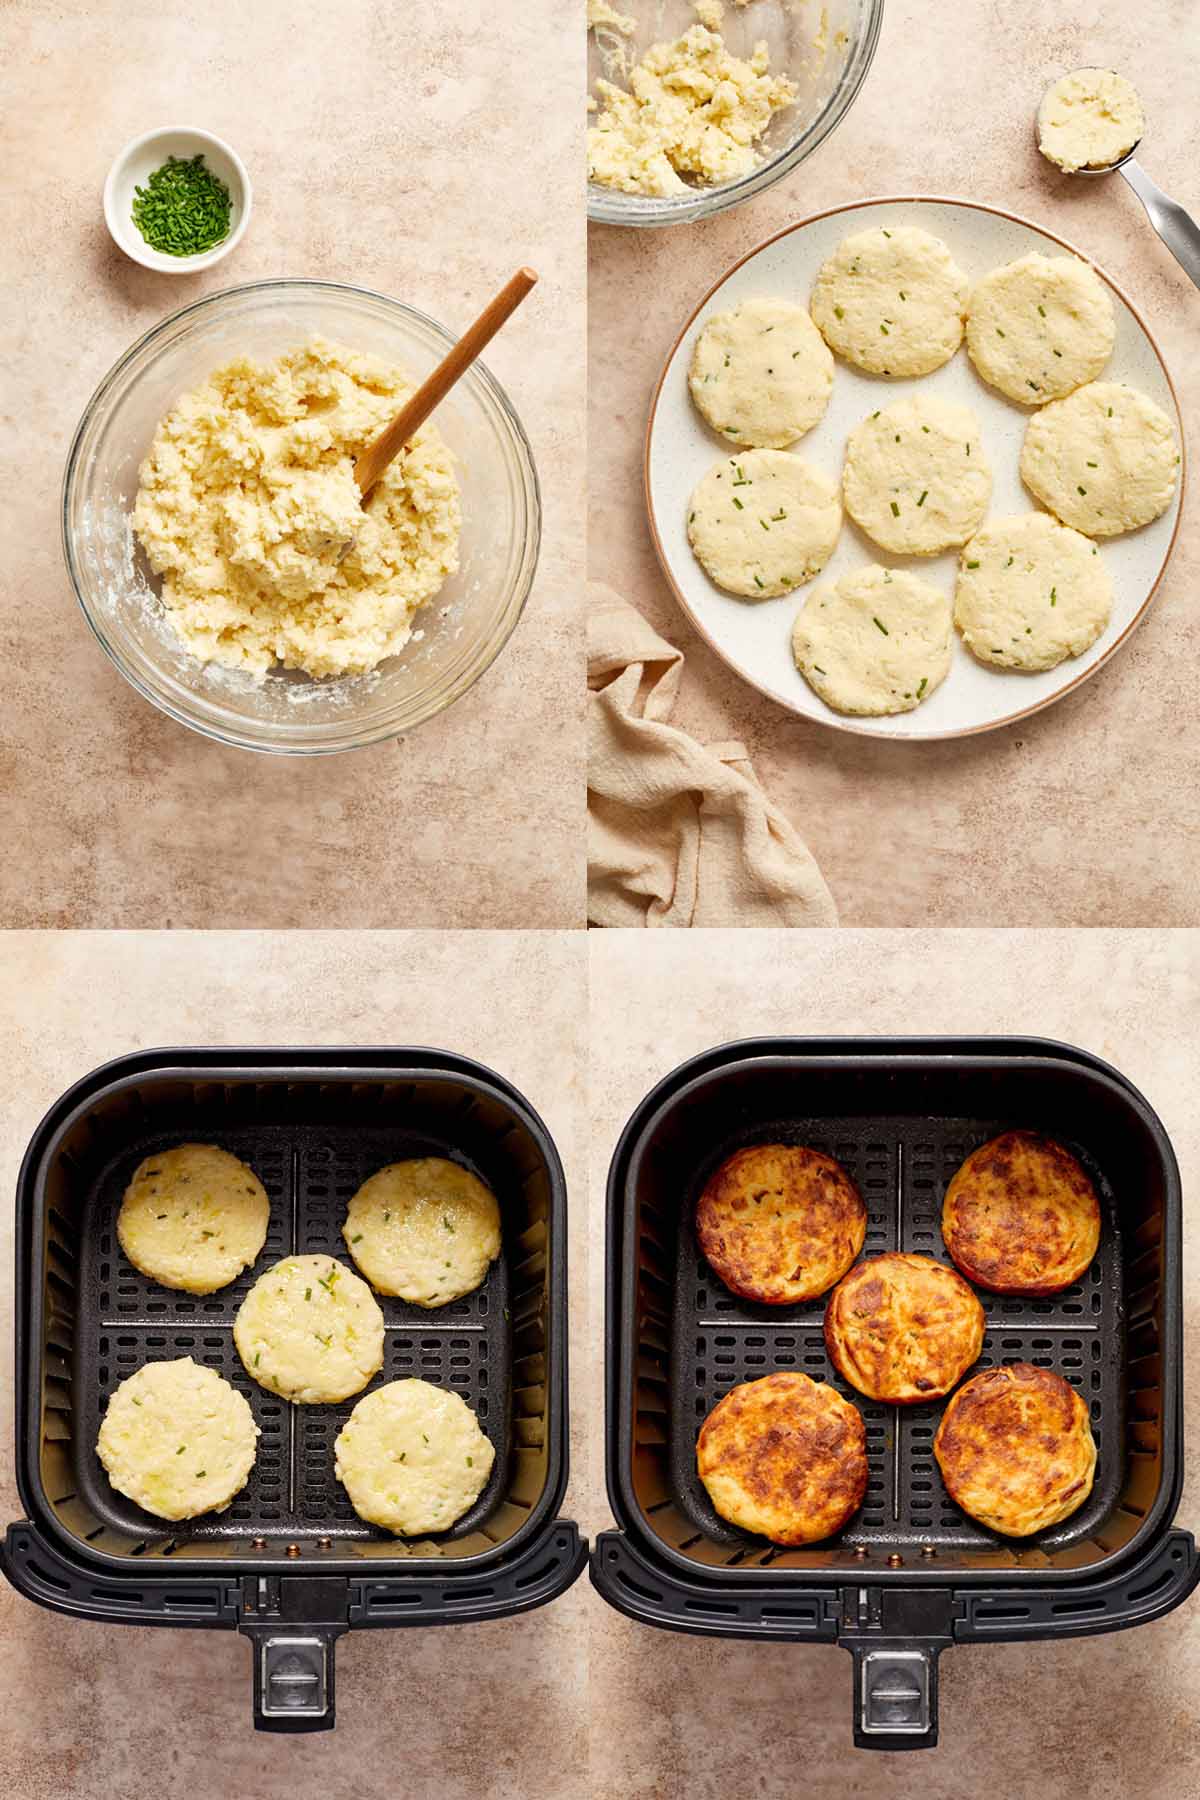 Collage of 4 images showing how to make potato cakes and air fry them.